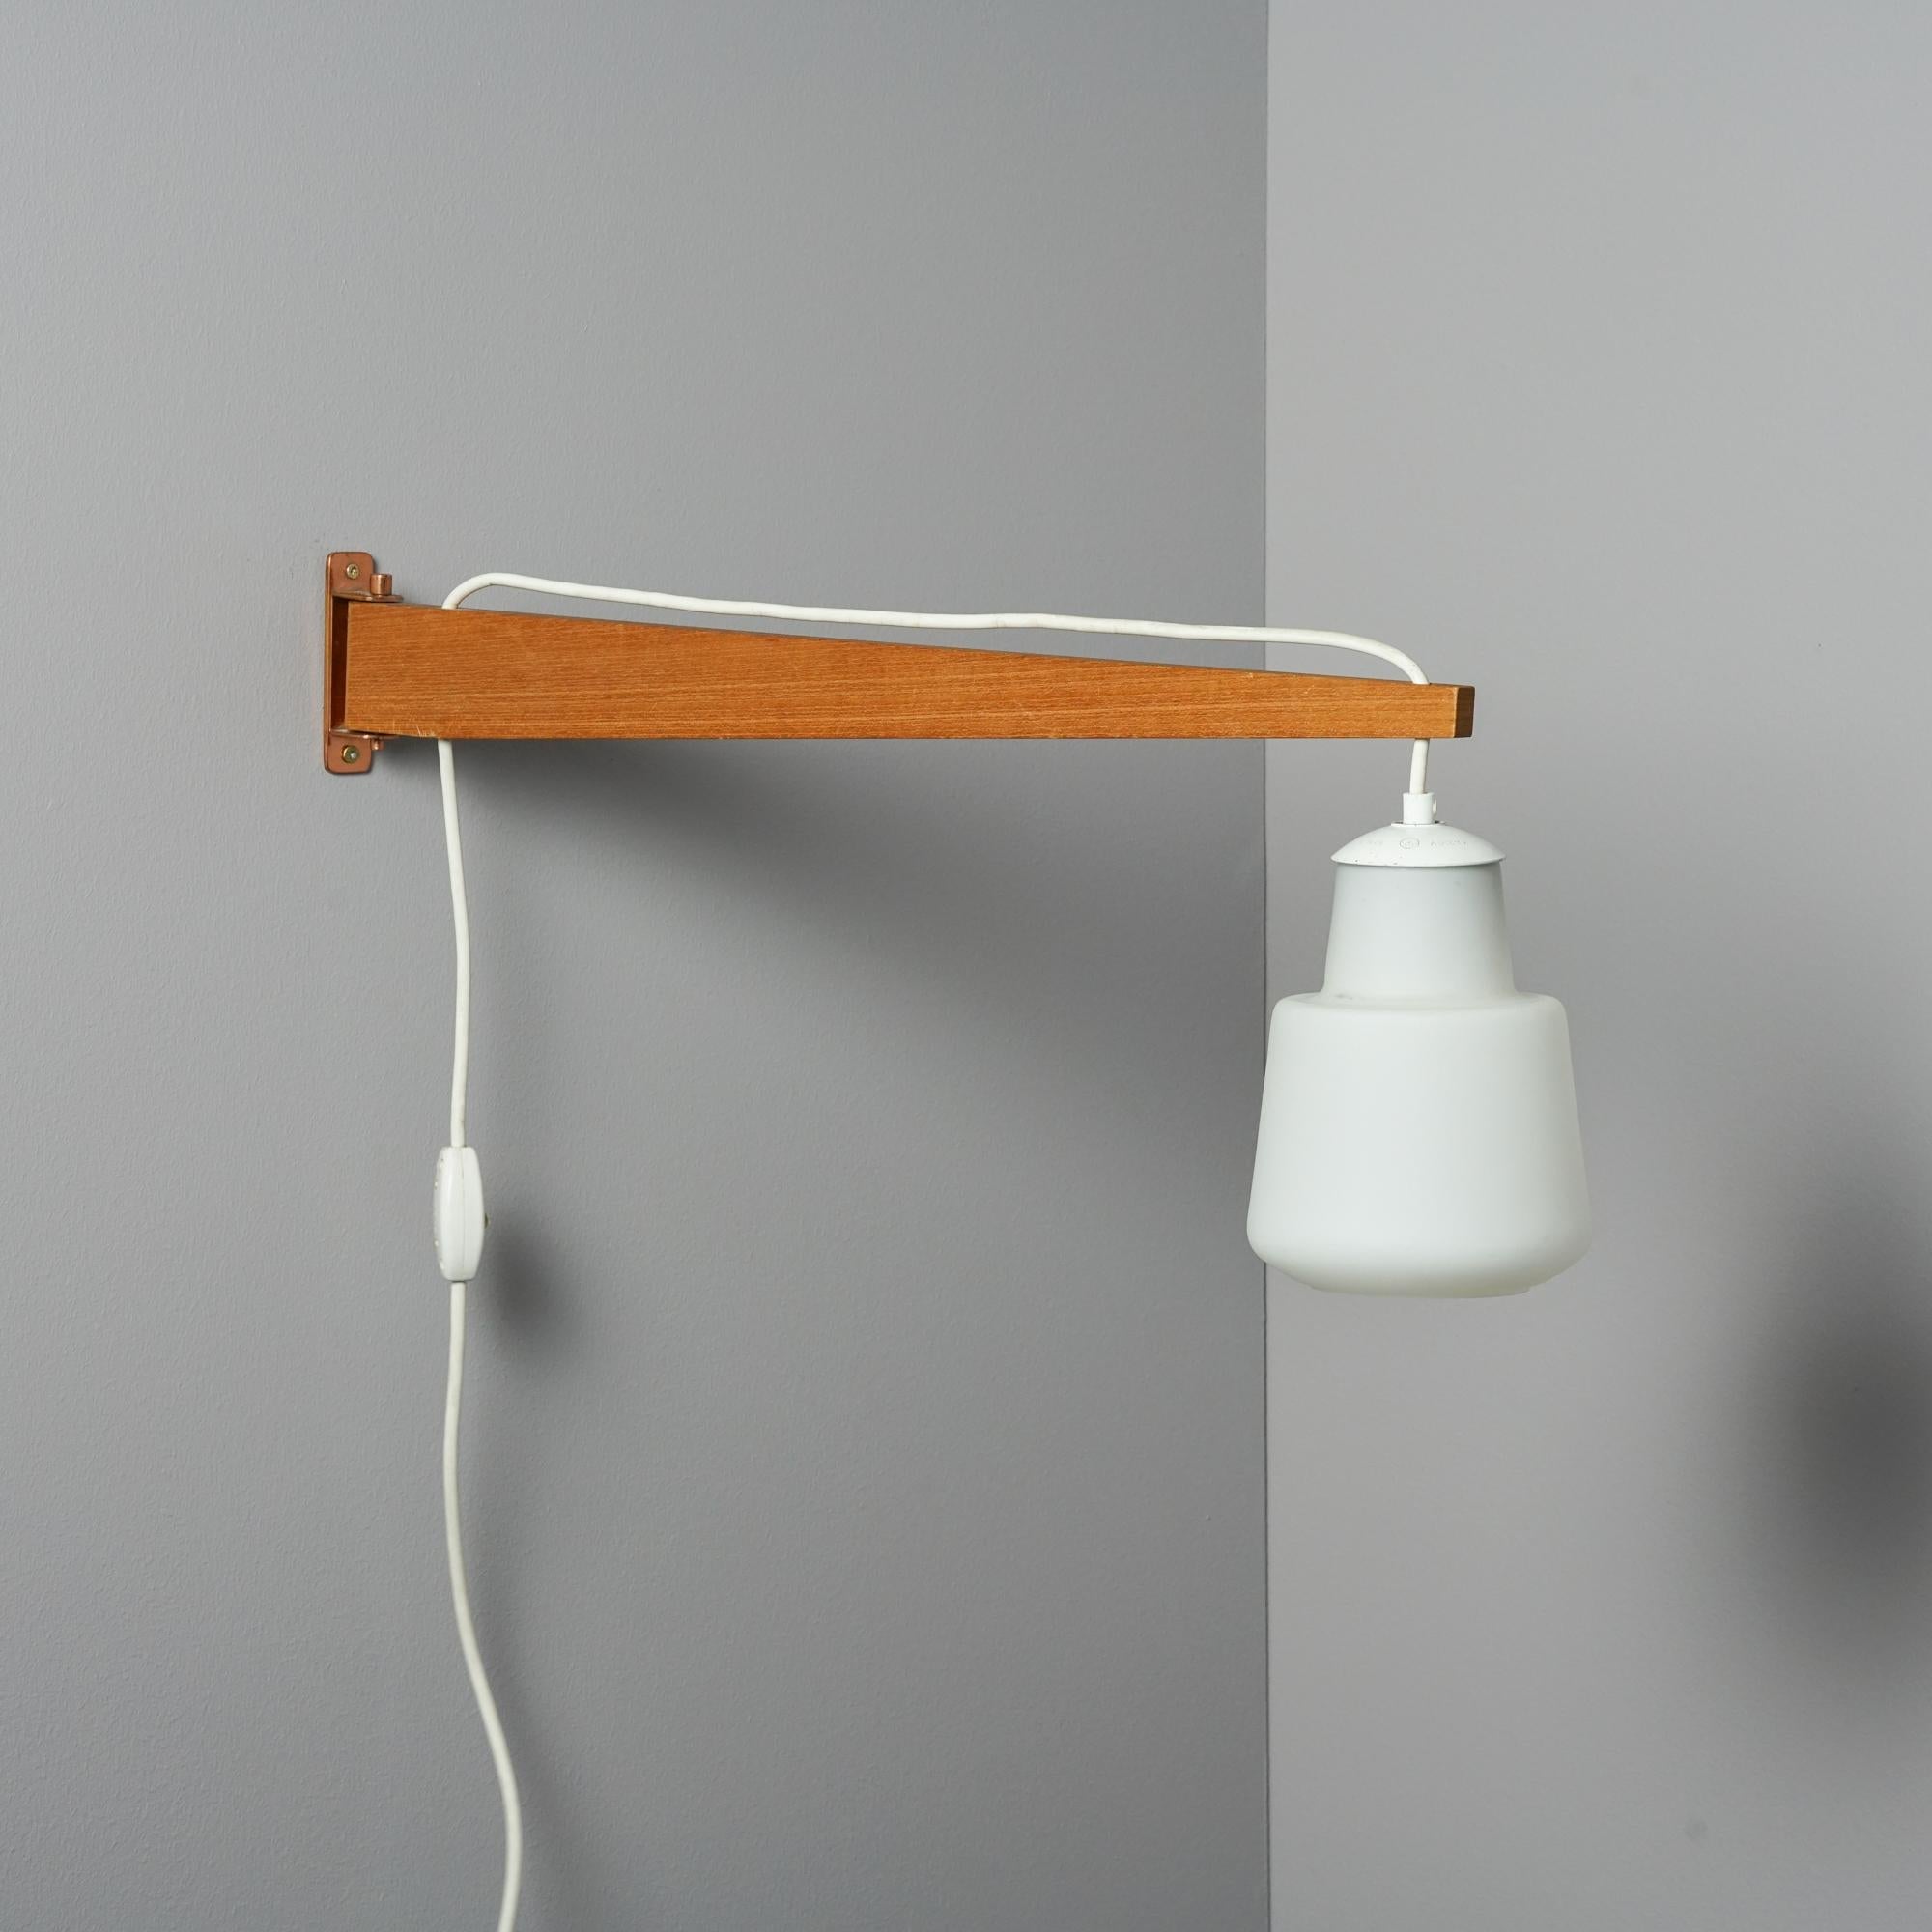 Scandinavian modern wall light by Itsu Finland from the 1960s. Teak frame, milk glass shade. Shade height adjustable. Manufactures stamp on the bottom. Good vintage condition, minor wear consistent with age and use.